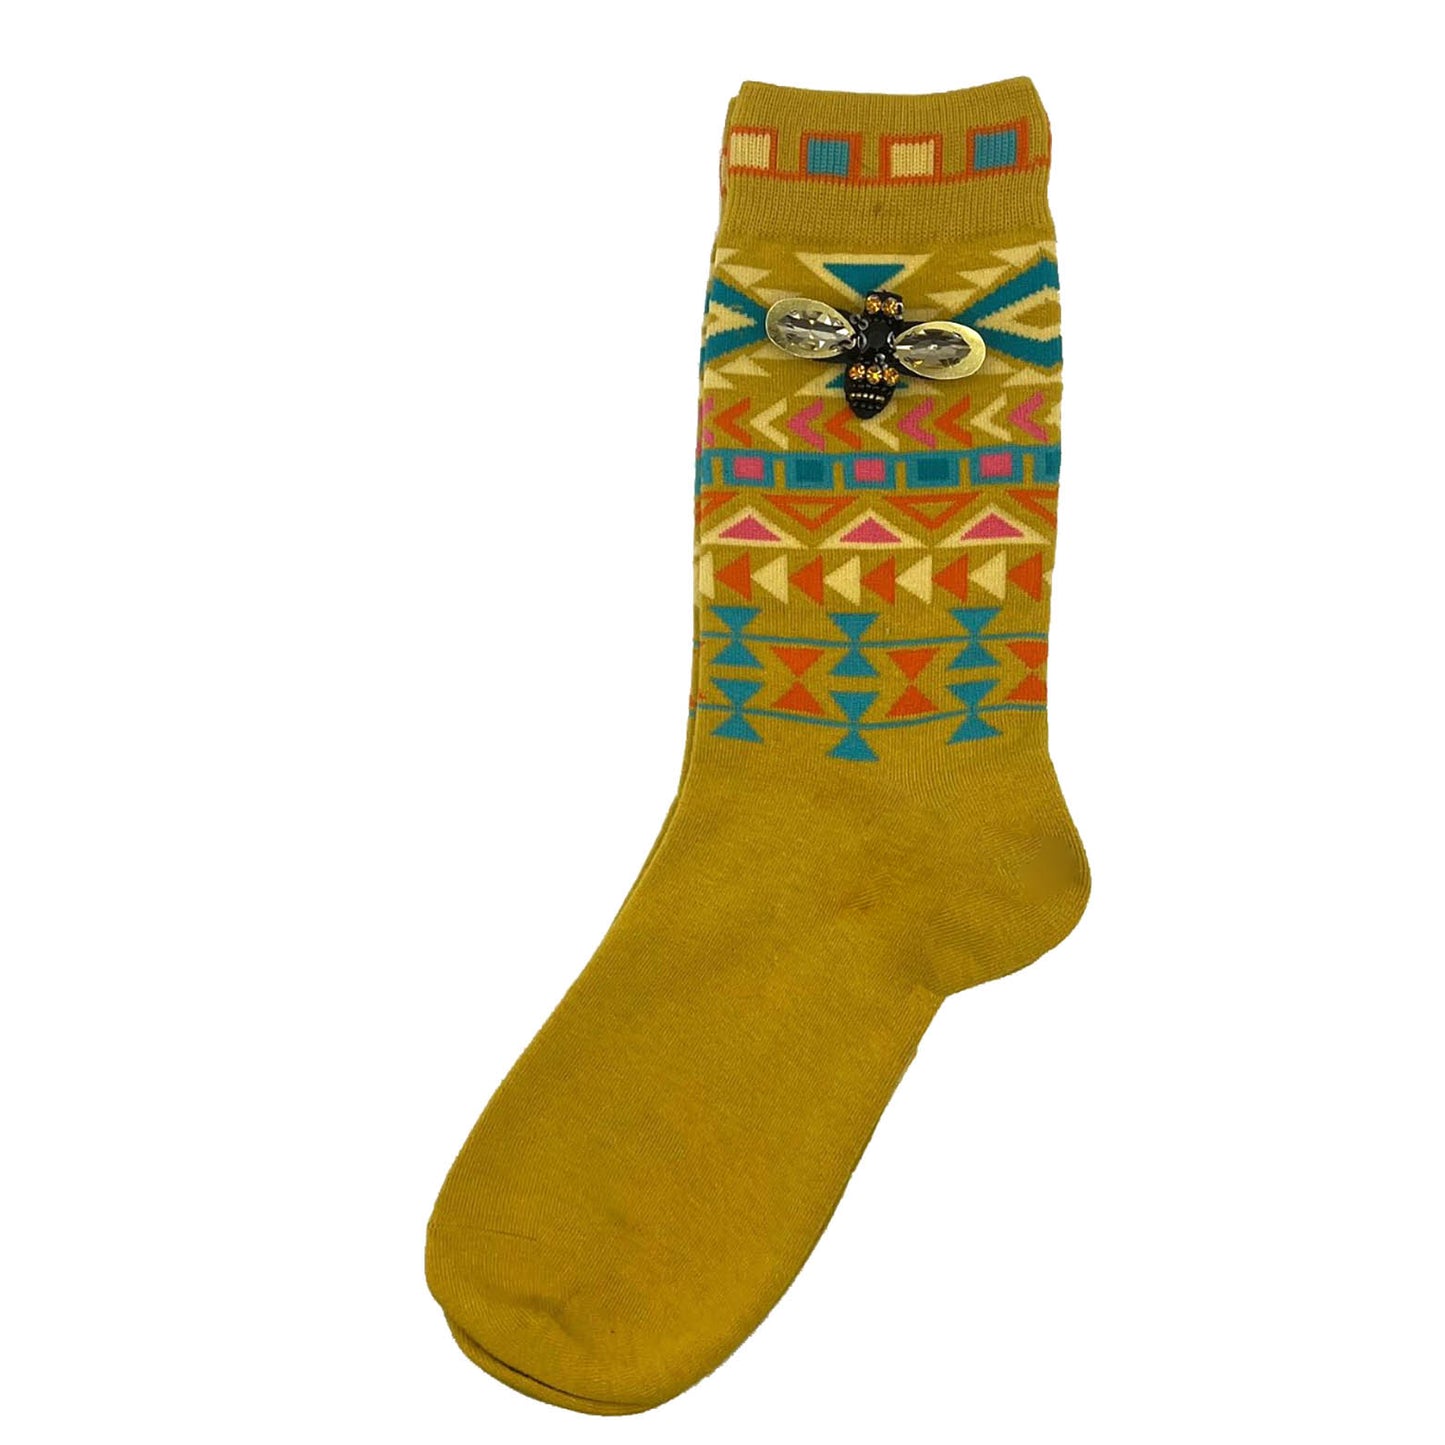 Oregon socks with or without a pin